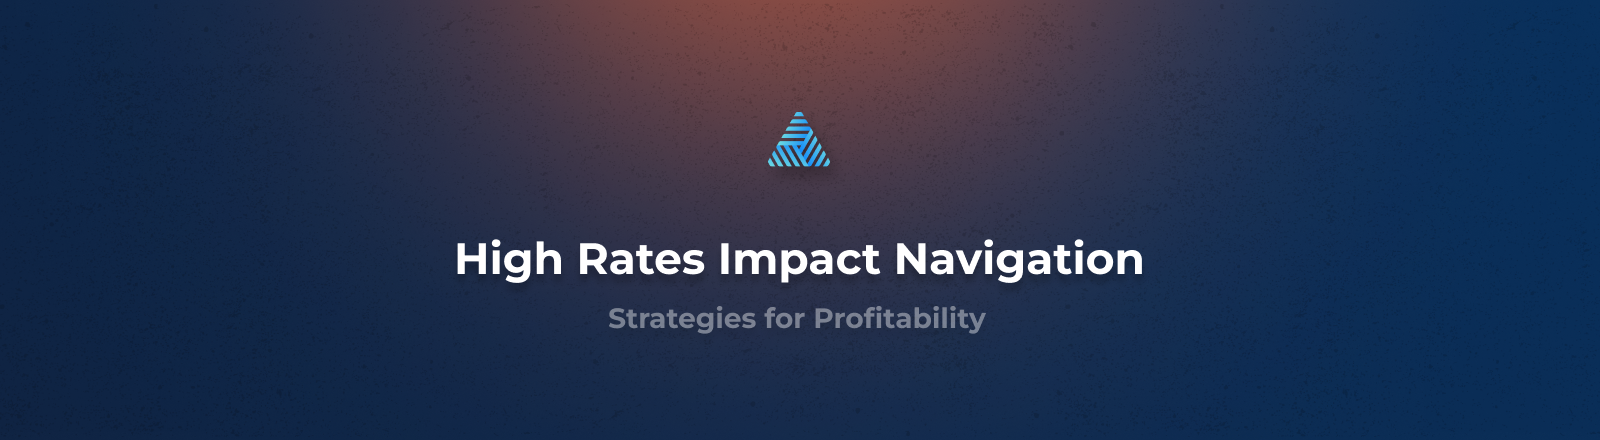 Navigating the Impact of High Rates Across Lending Verticals - Strategies for Profitability